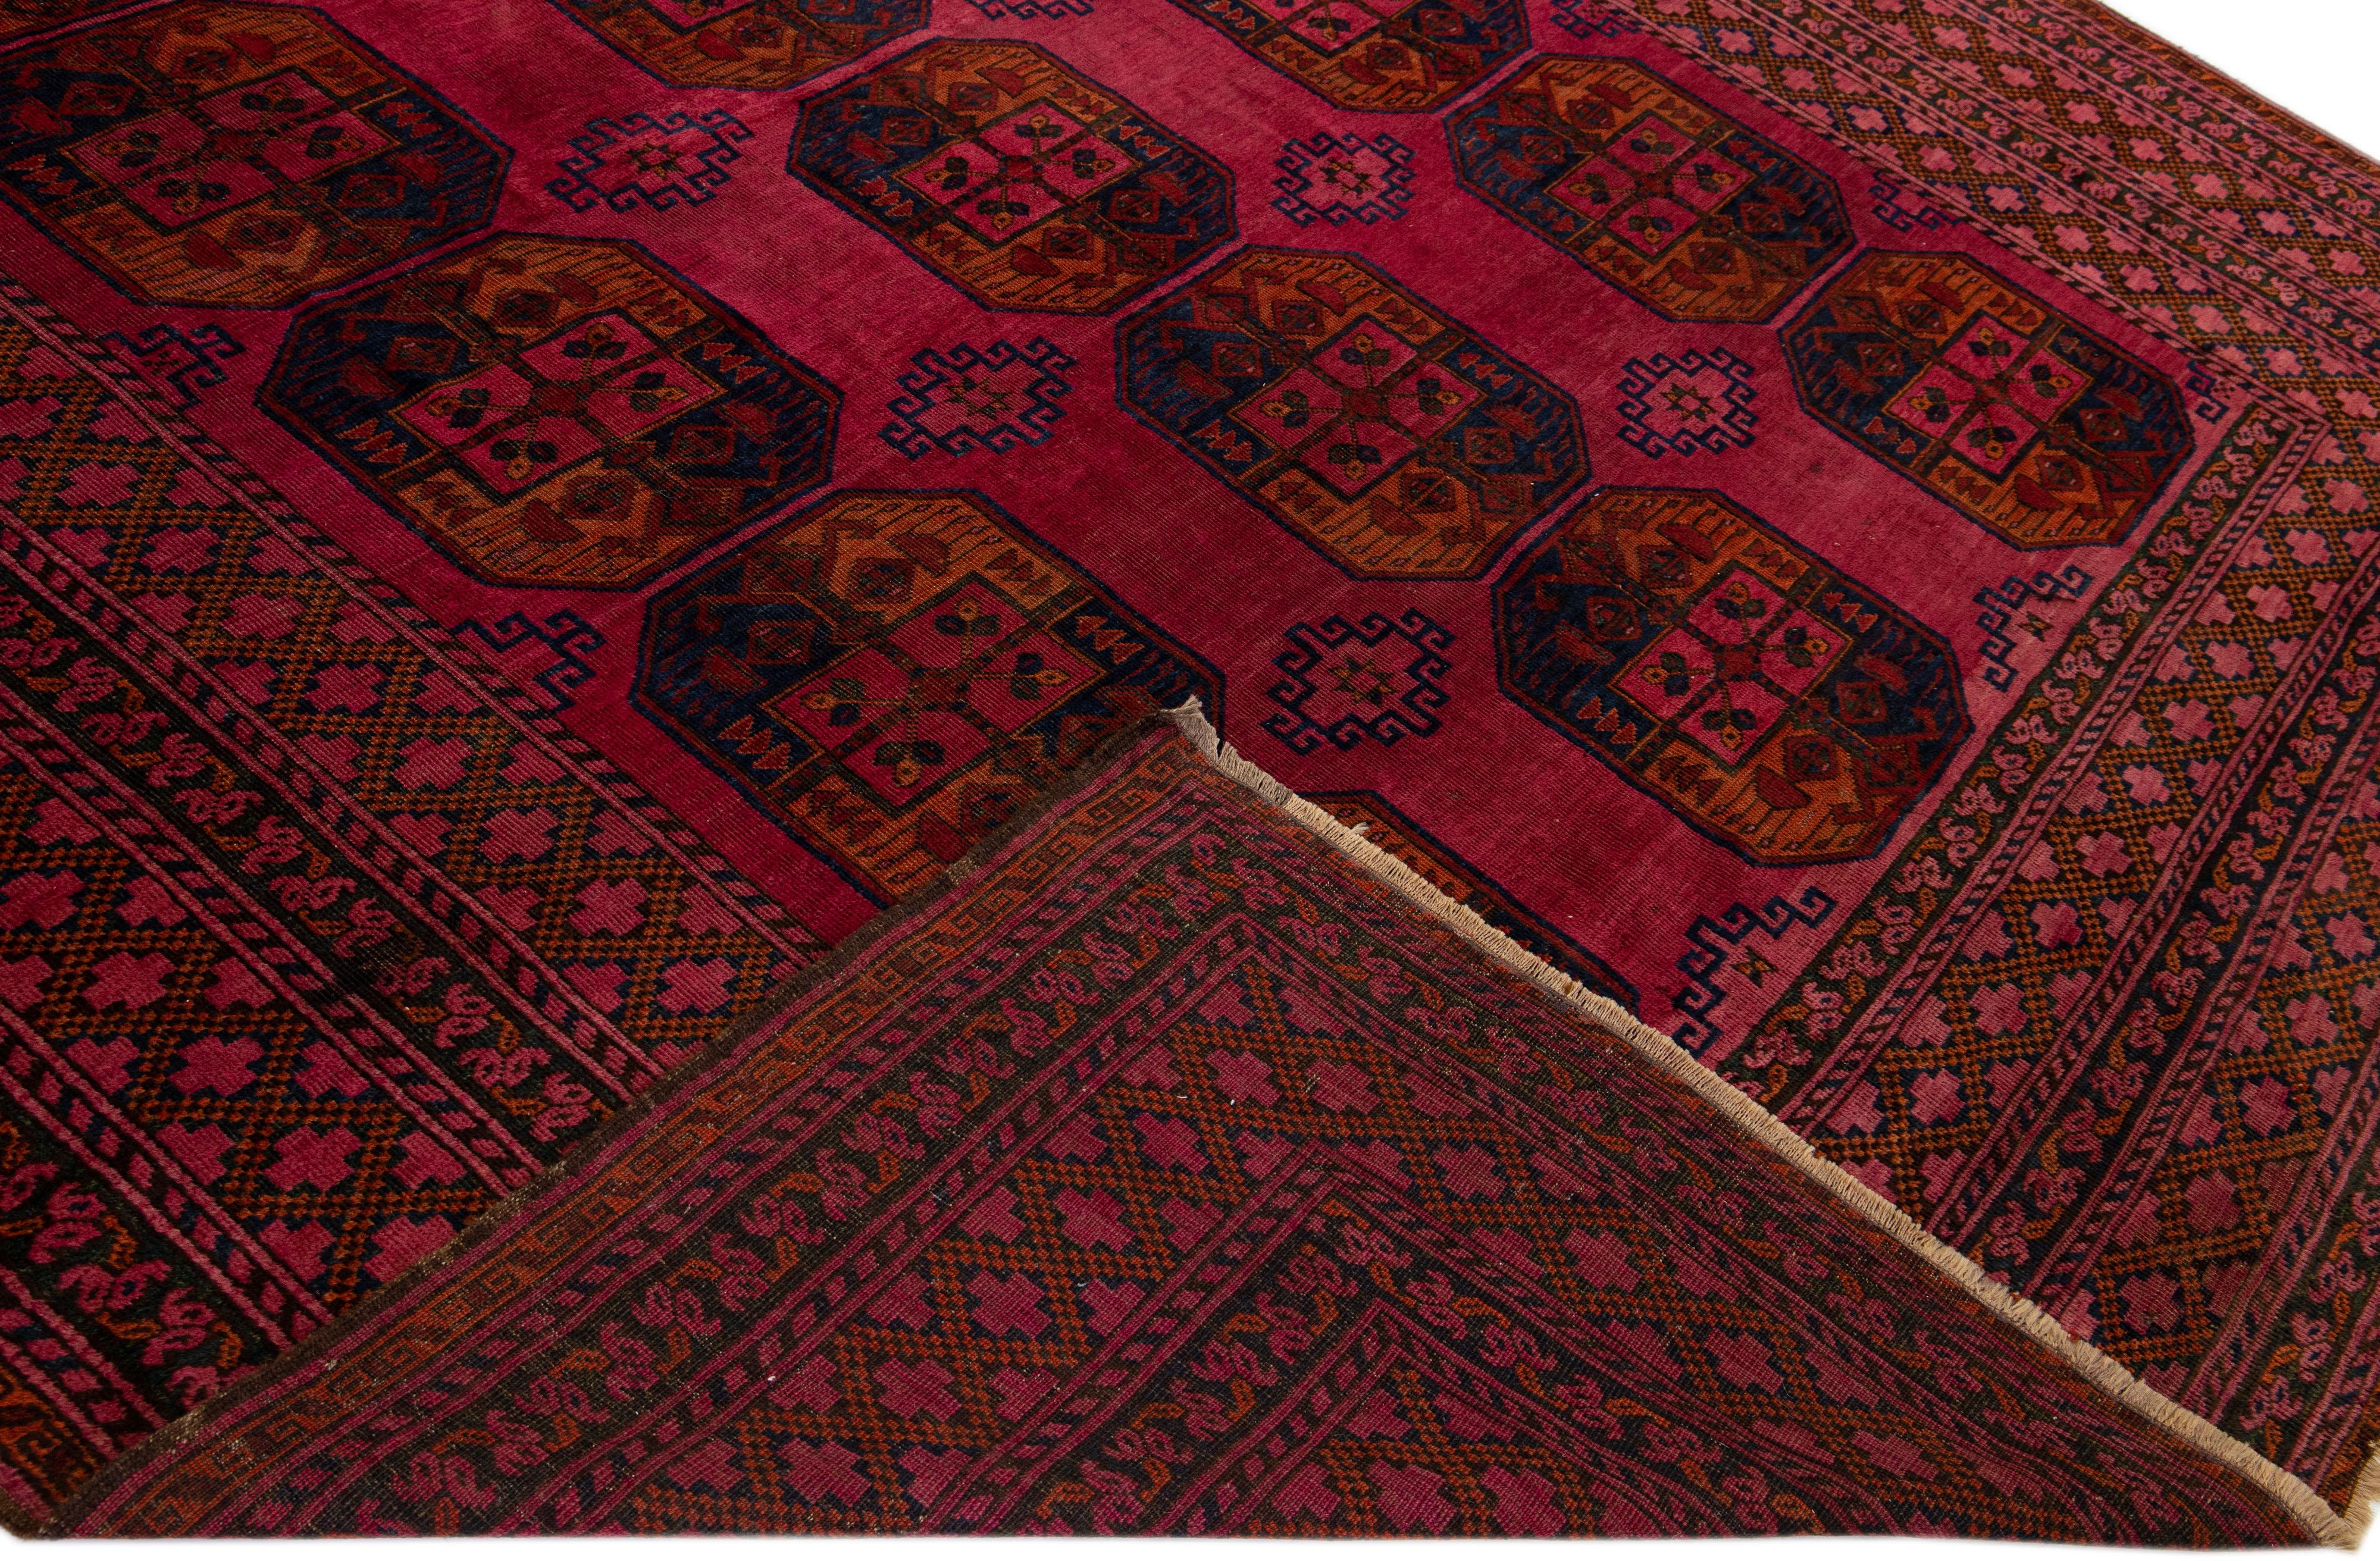 Beautiful antique Turkmen hand-knotted wool rug with a red field. This piece has brown accents in an all-over gul pattern design.

This rug measures: 10' x 19'.